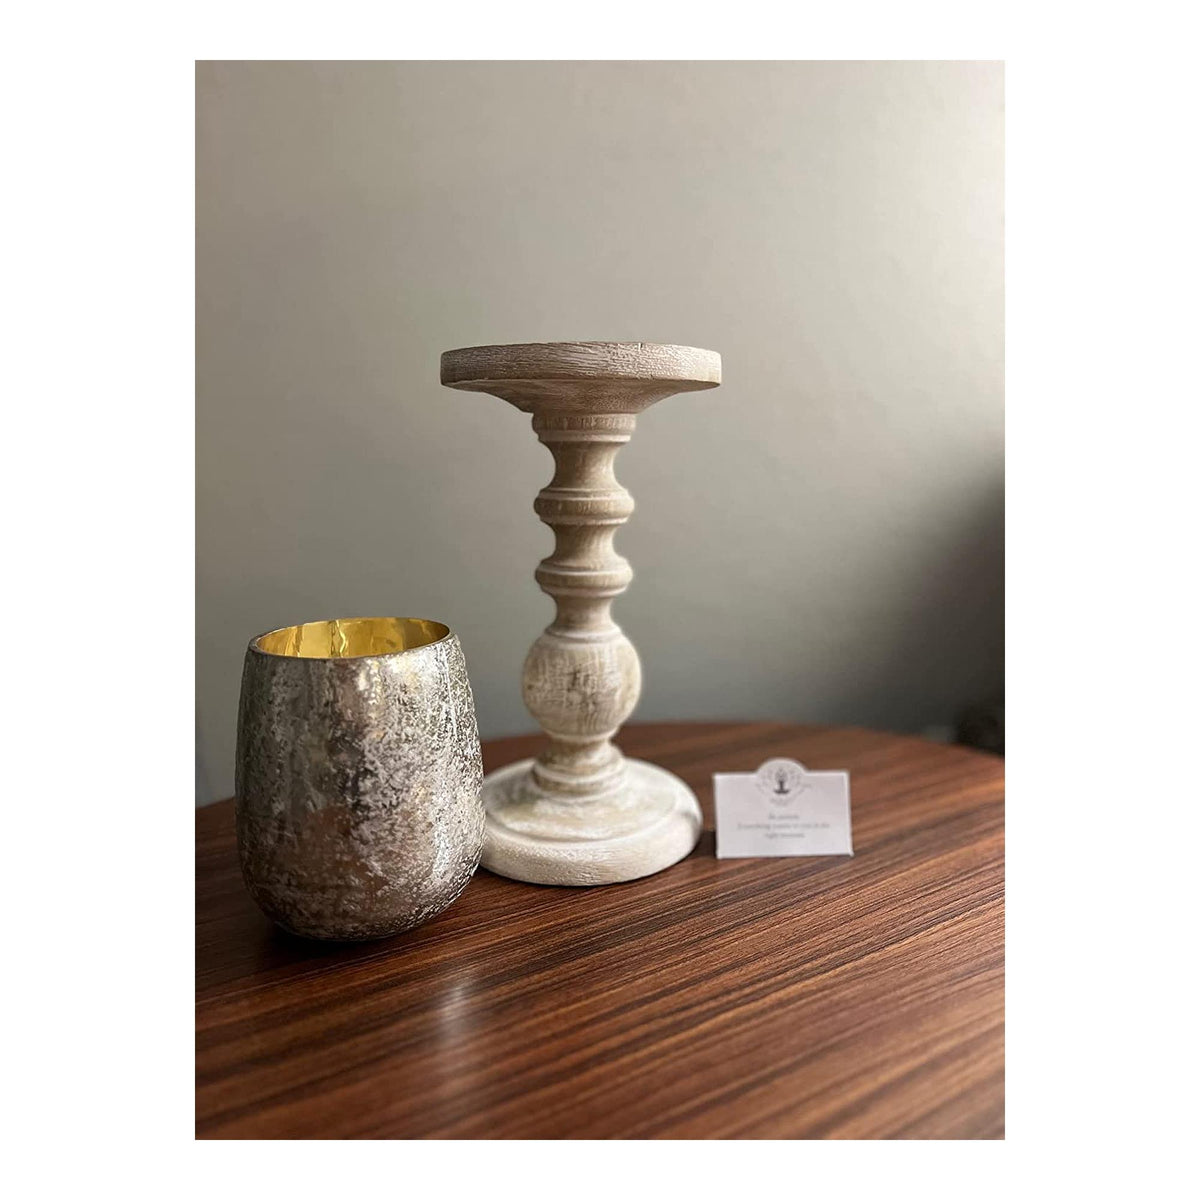 HOSLEY®  Wood Pillar Candle Holder, White Color, Set of 2, 9 inches High each